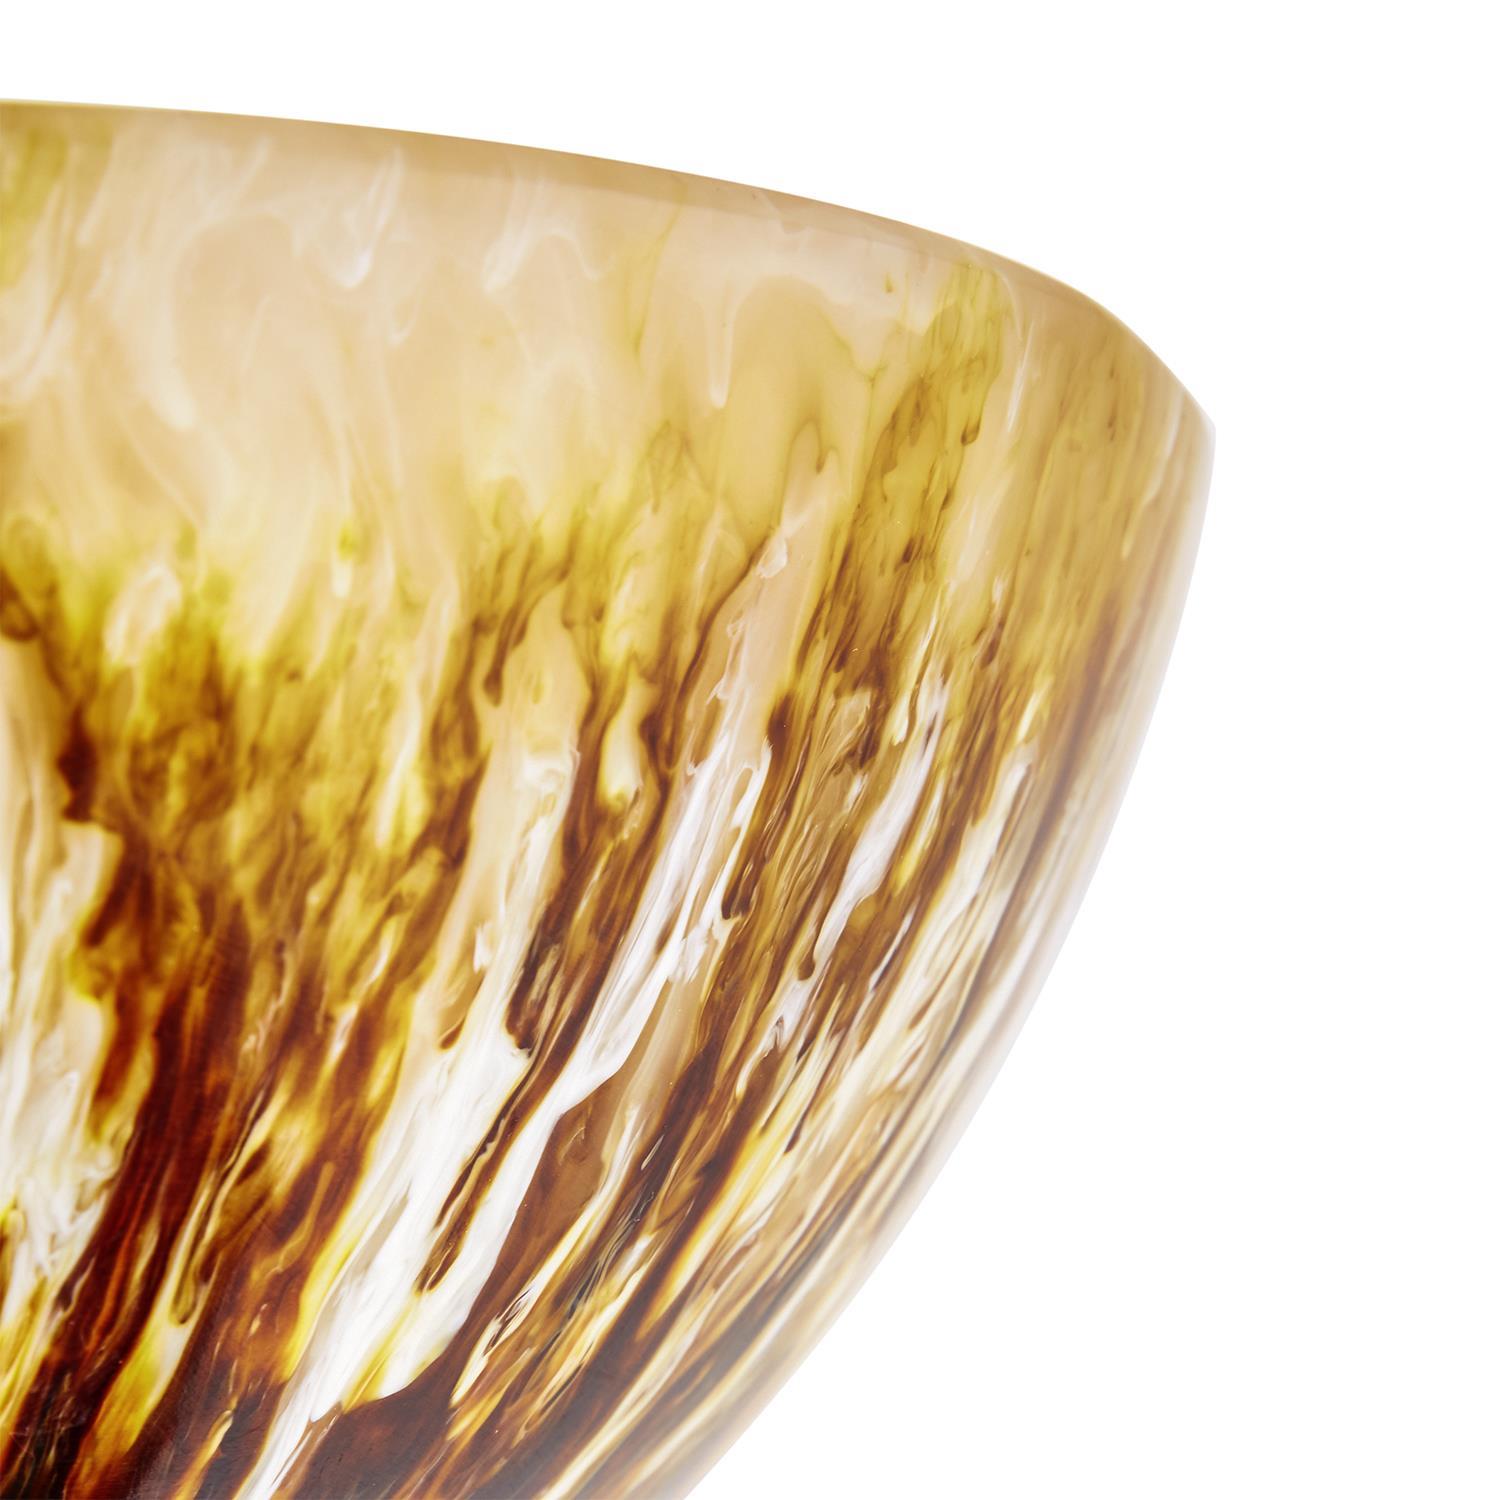 Marbleized Earth Tones Serving Bowl